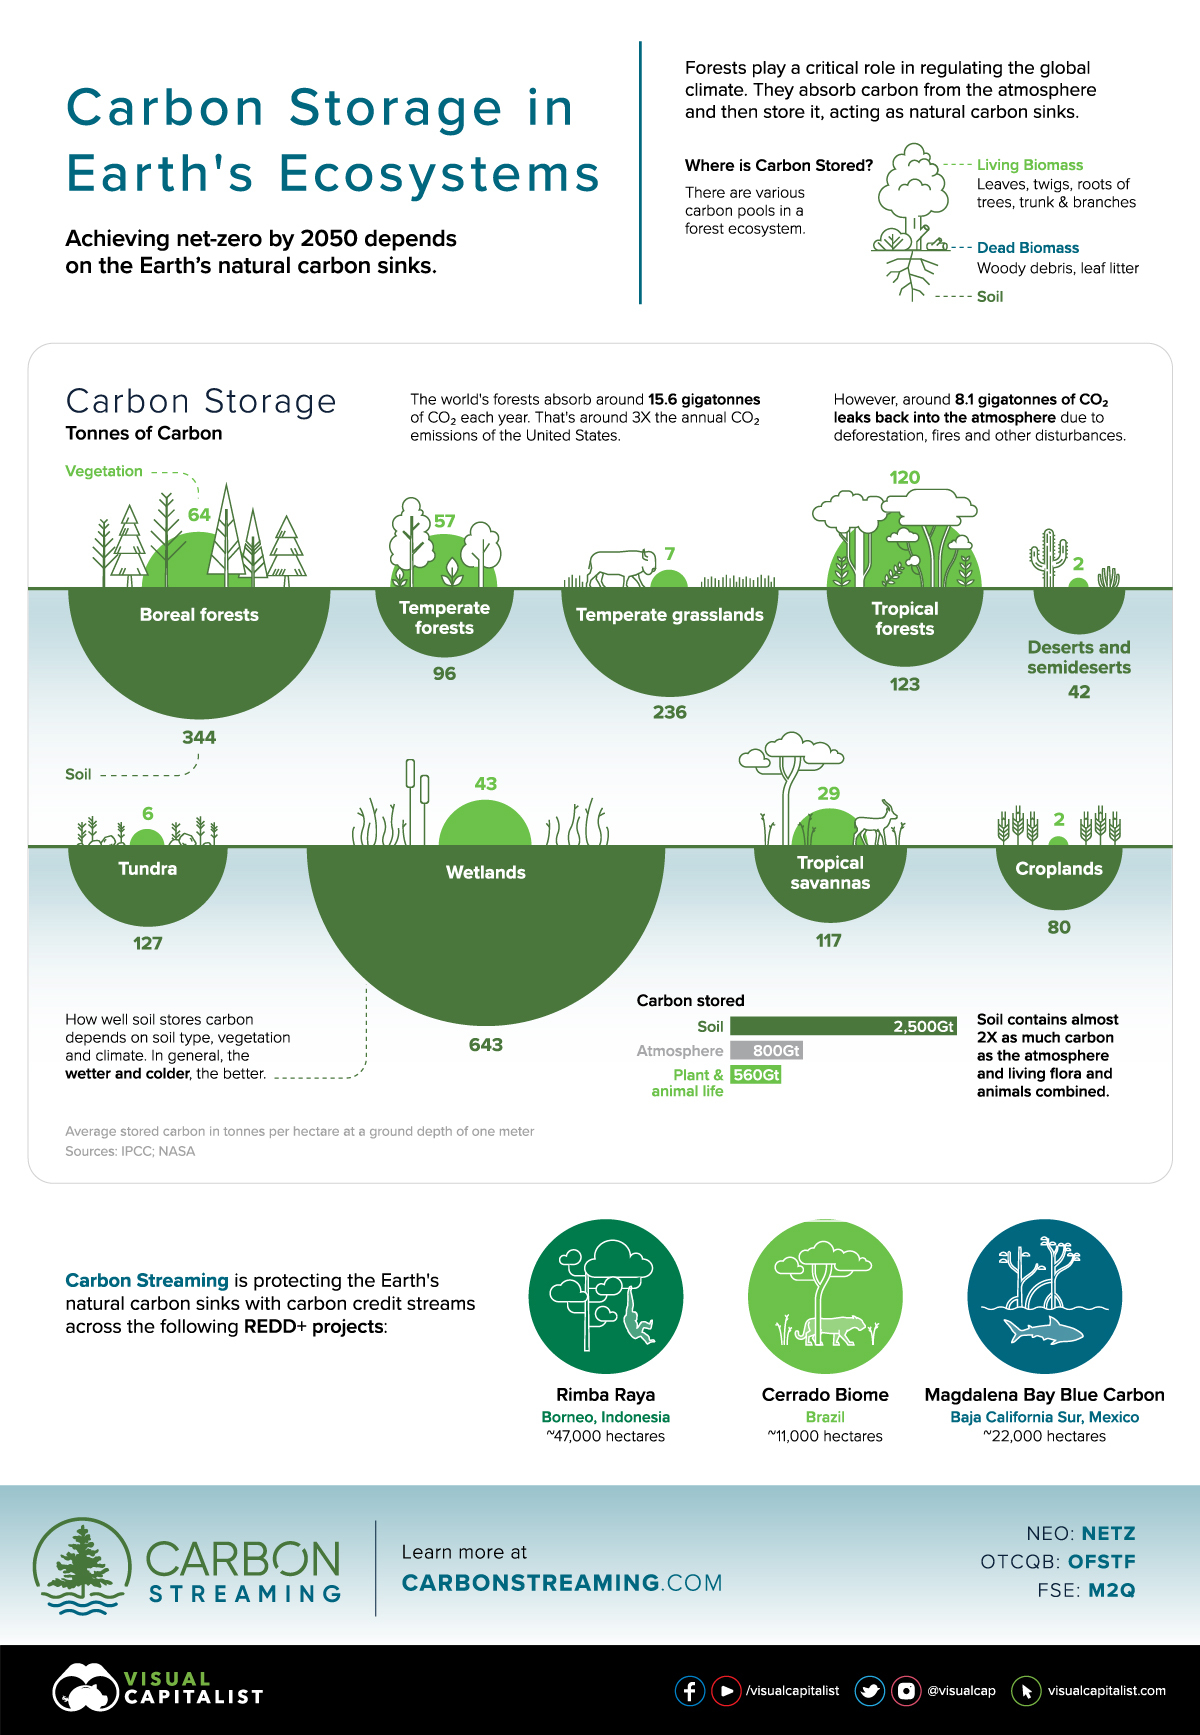 Visualizing Carbon Storage in Earth's Ecosystems